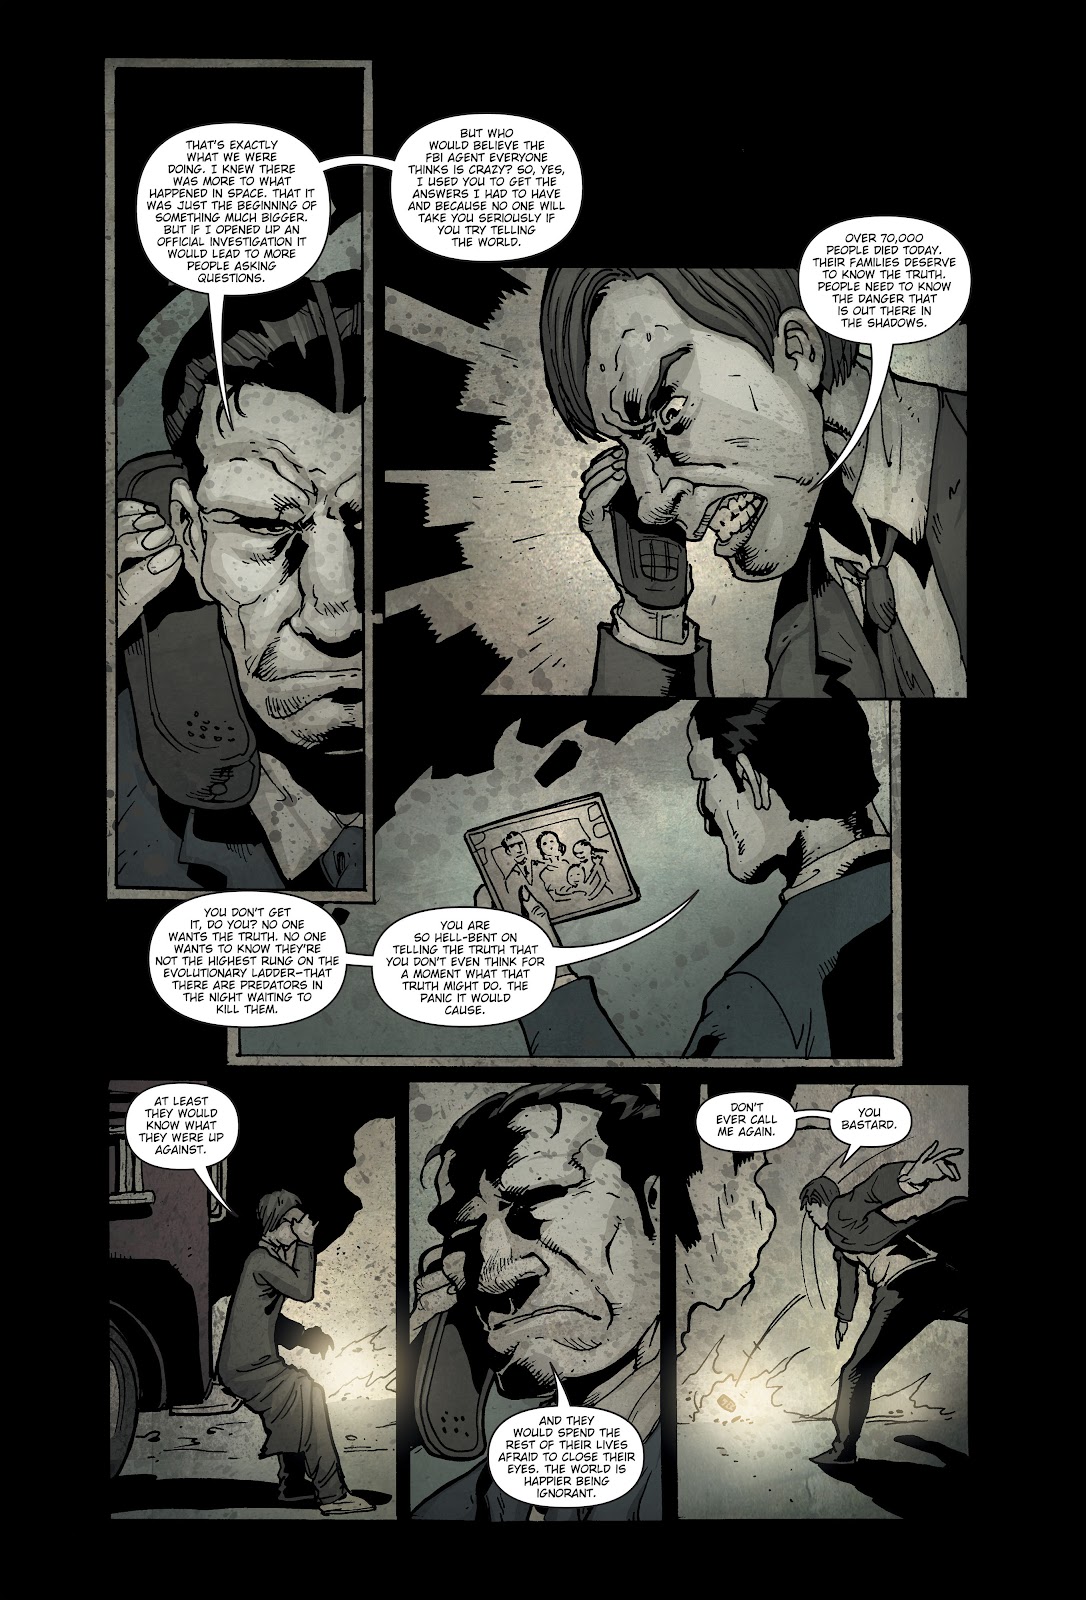 30 Days of Night: Spreading the Disease issue 5 - Page 26